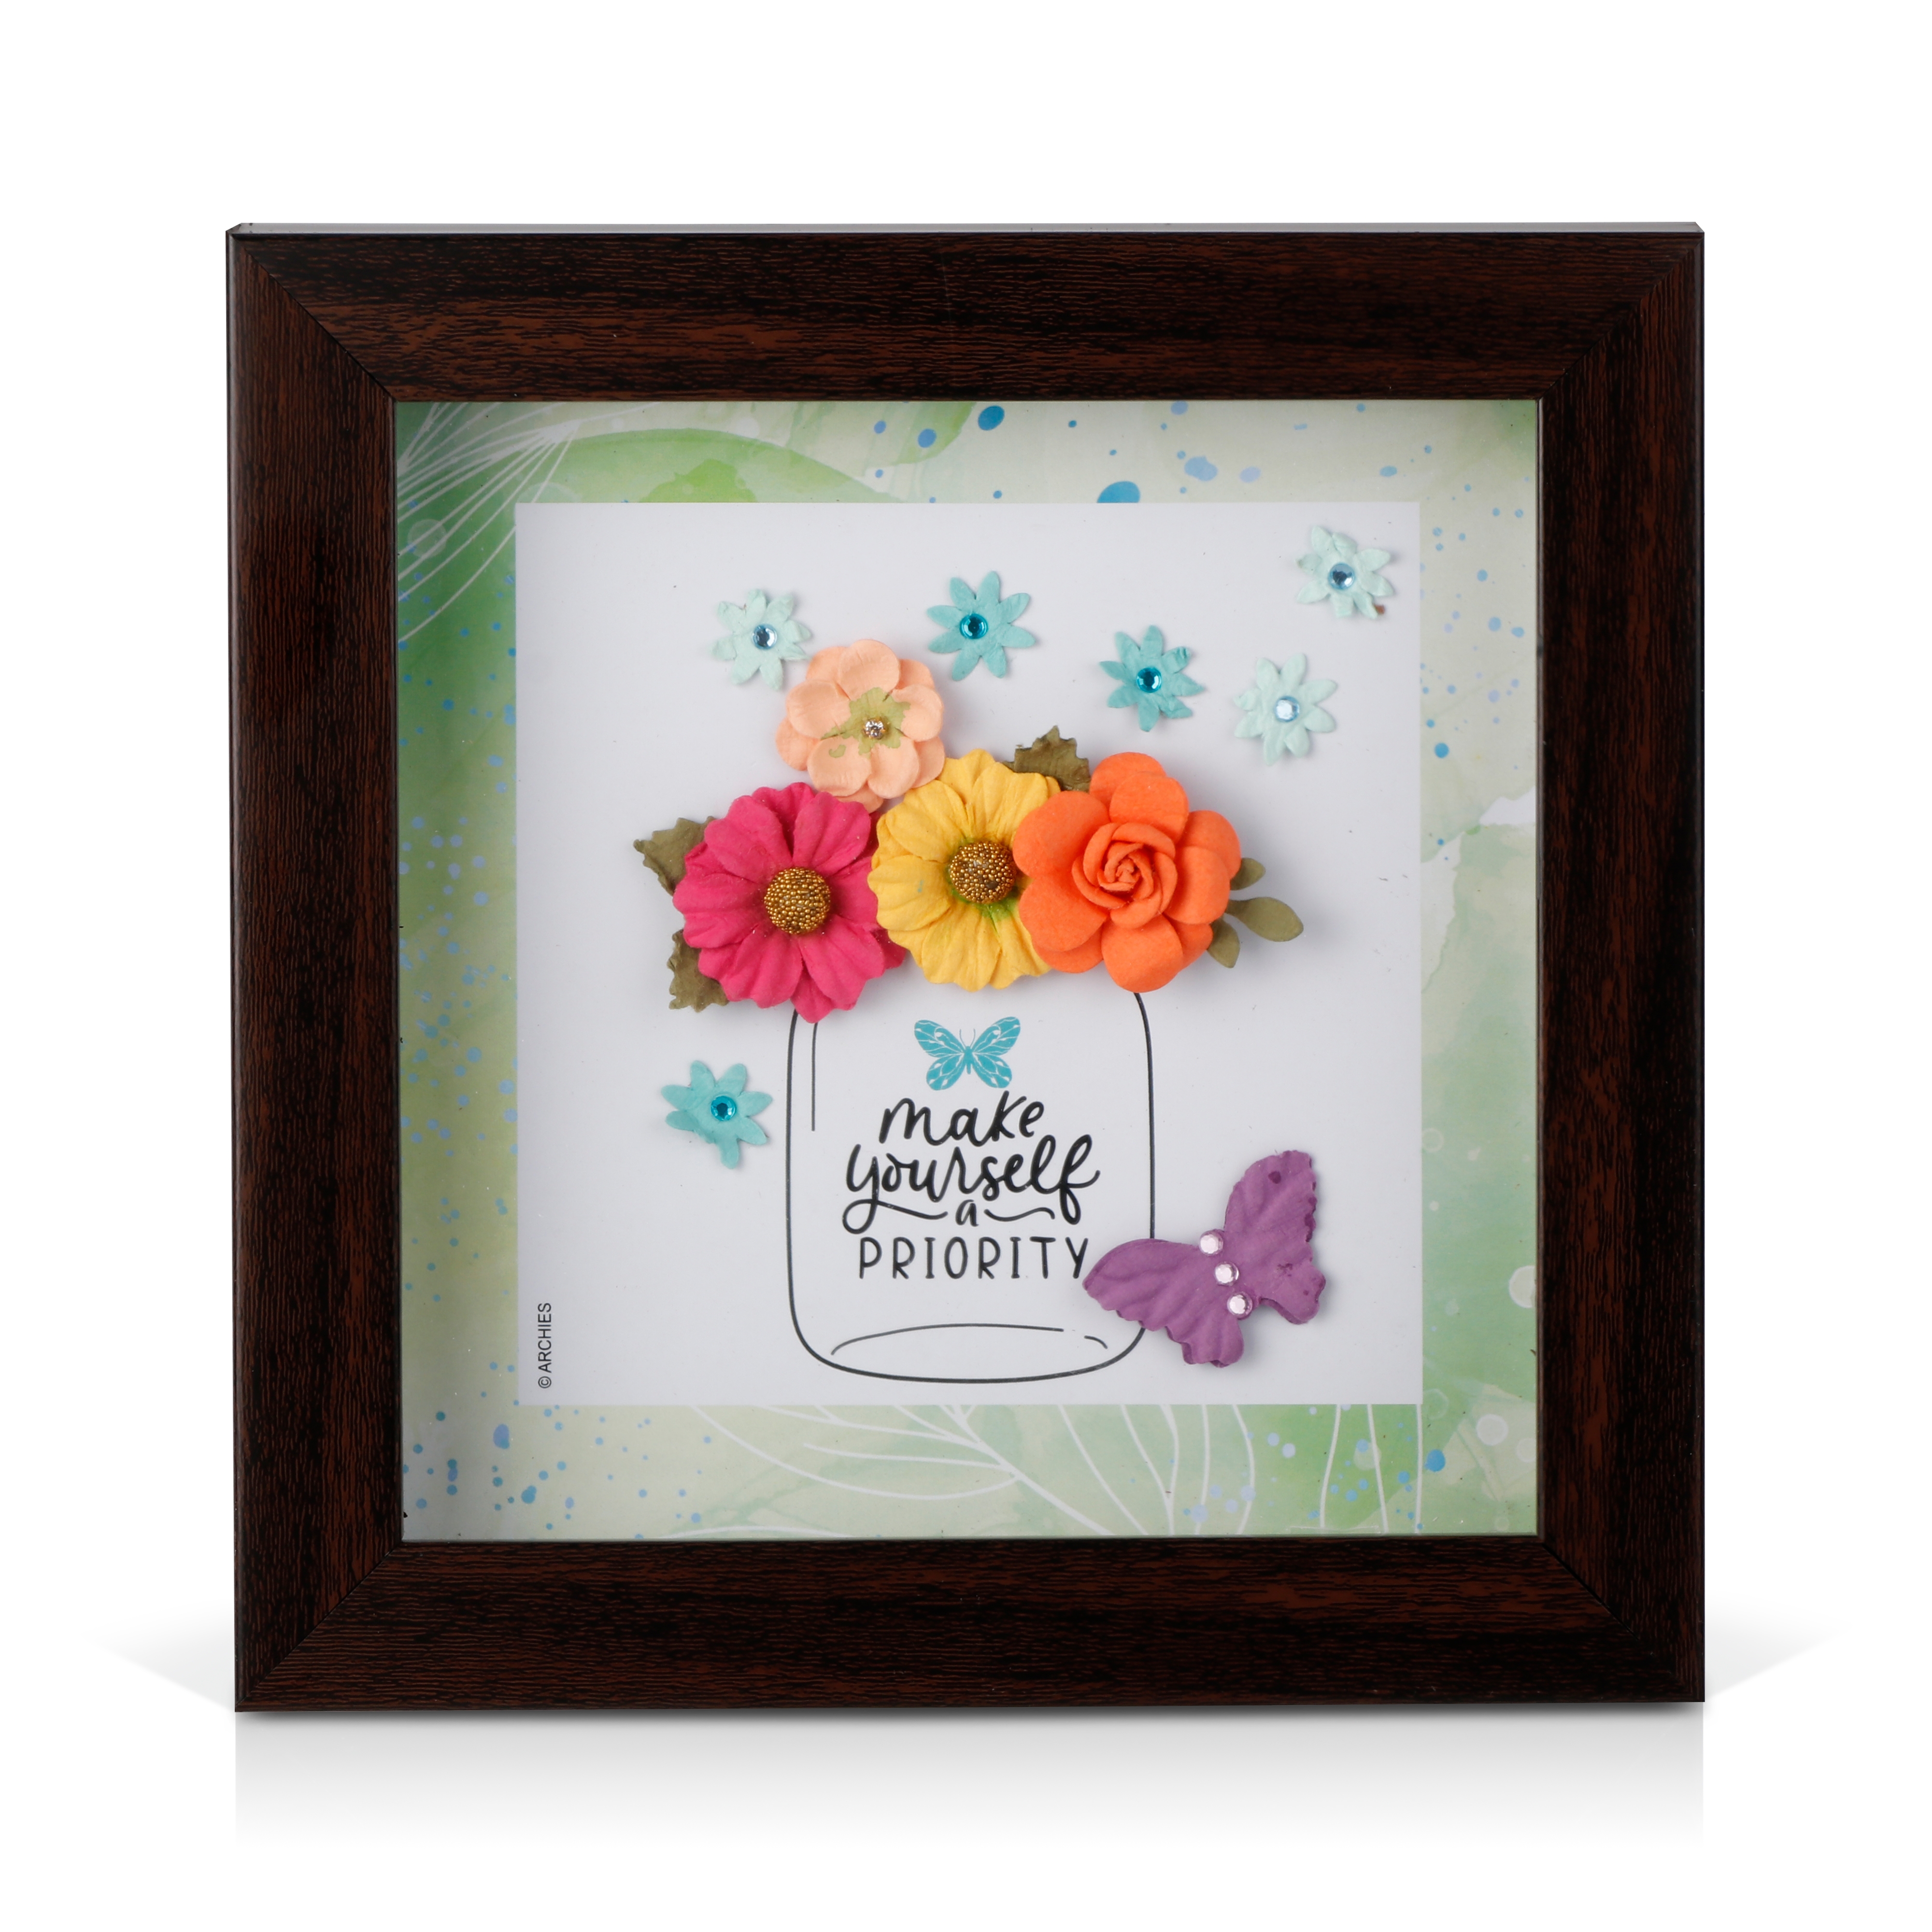 Archies wooden Photo Frame 